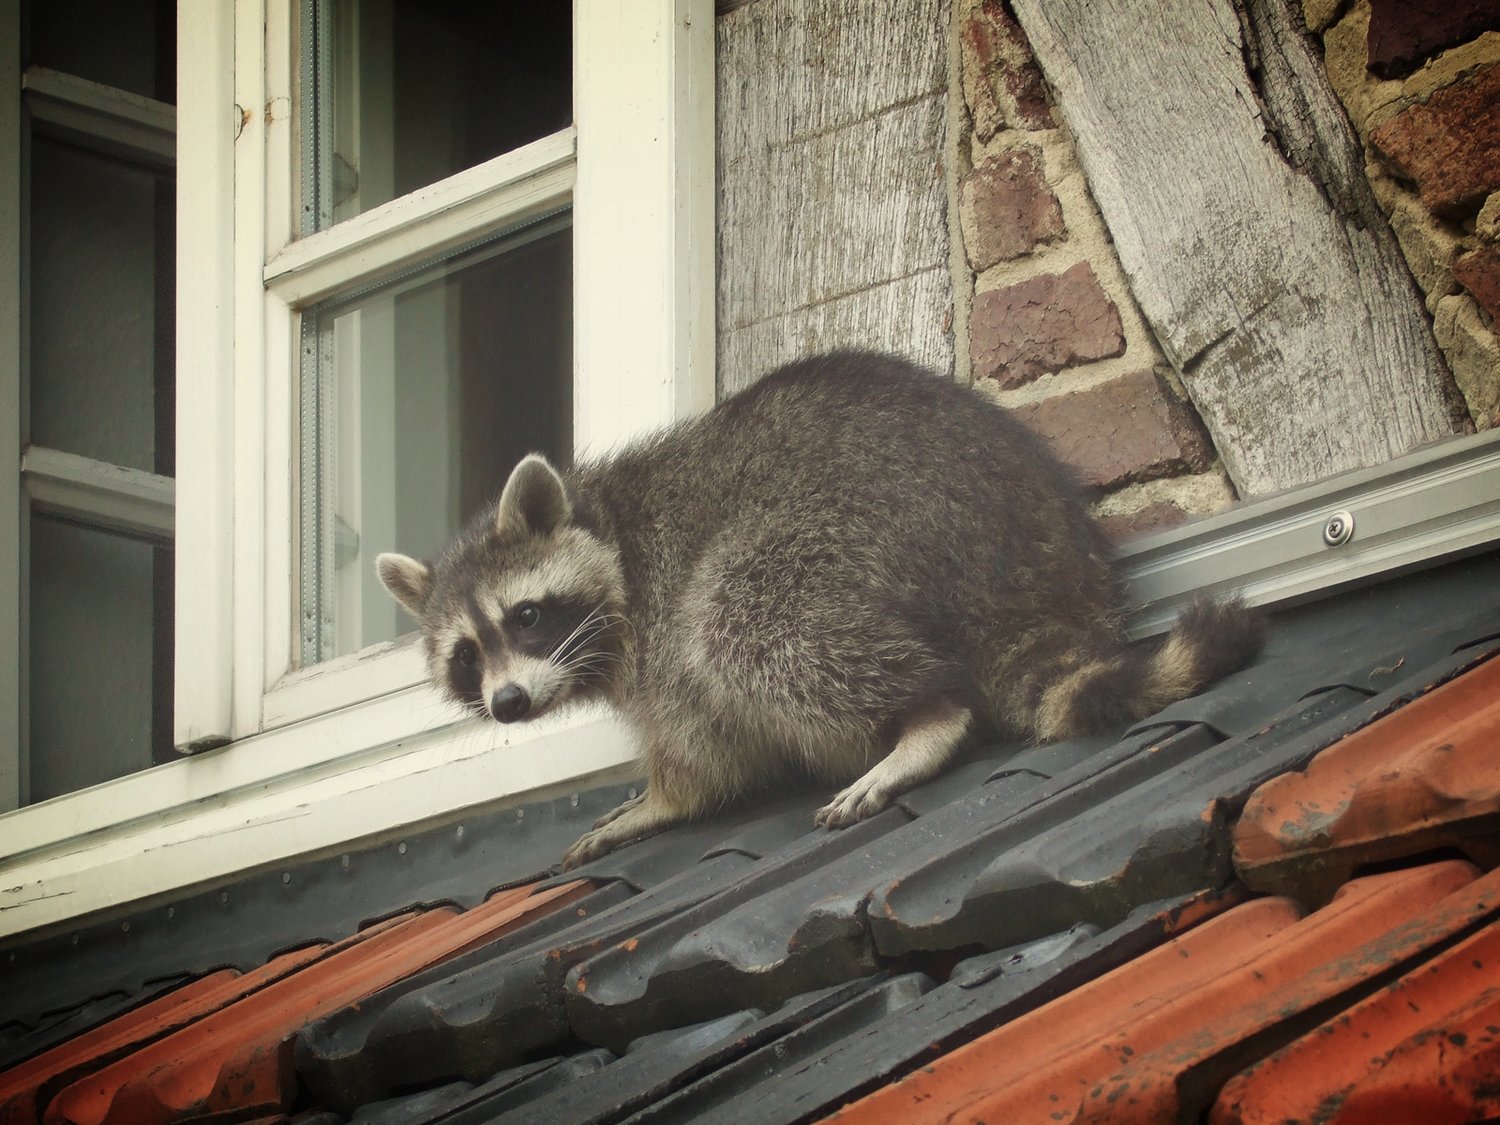 Humane Raccoon Control: Alternatives to Lethal Traps and Poisons